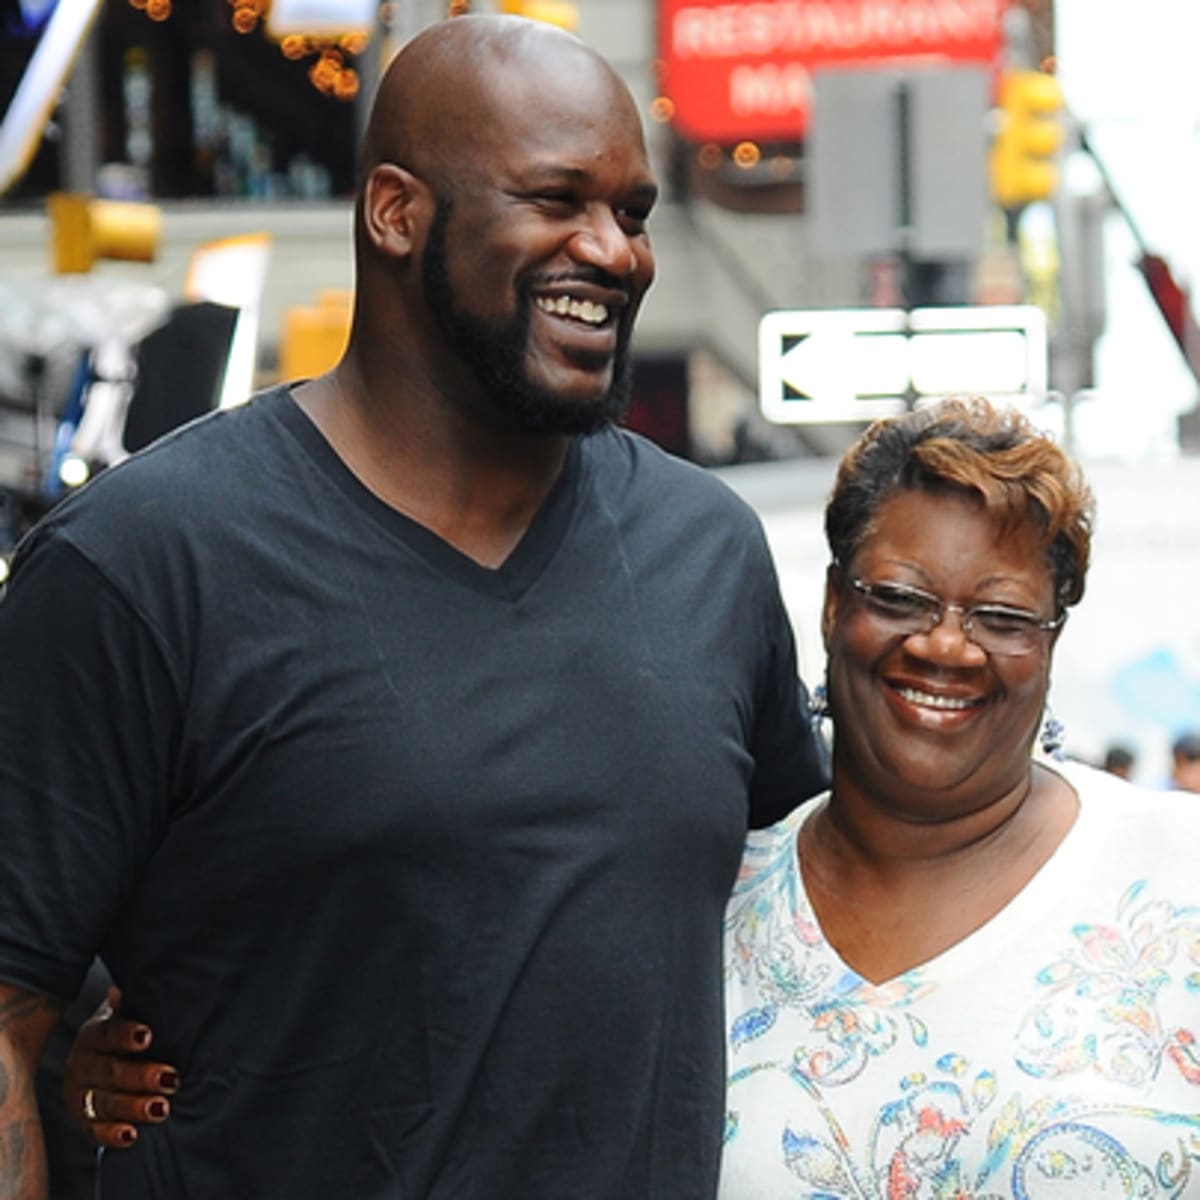 Shaq's Mom Tells Him to Leave JaVale McGee Alone